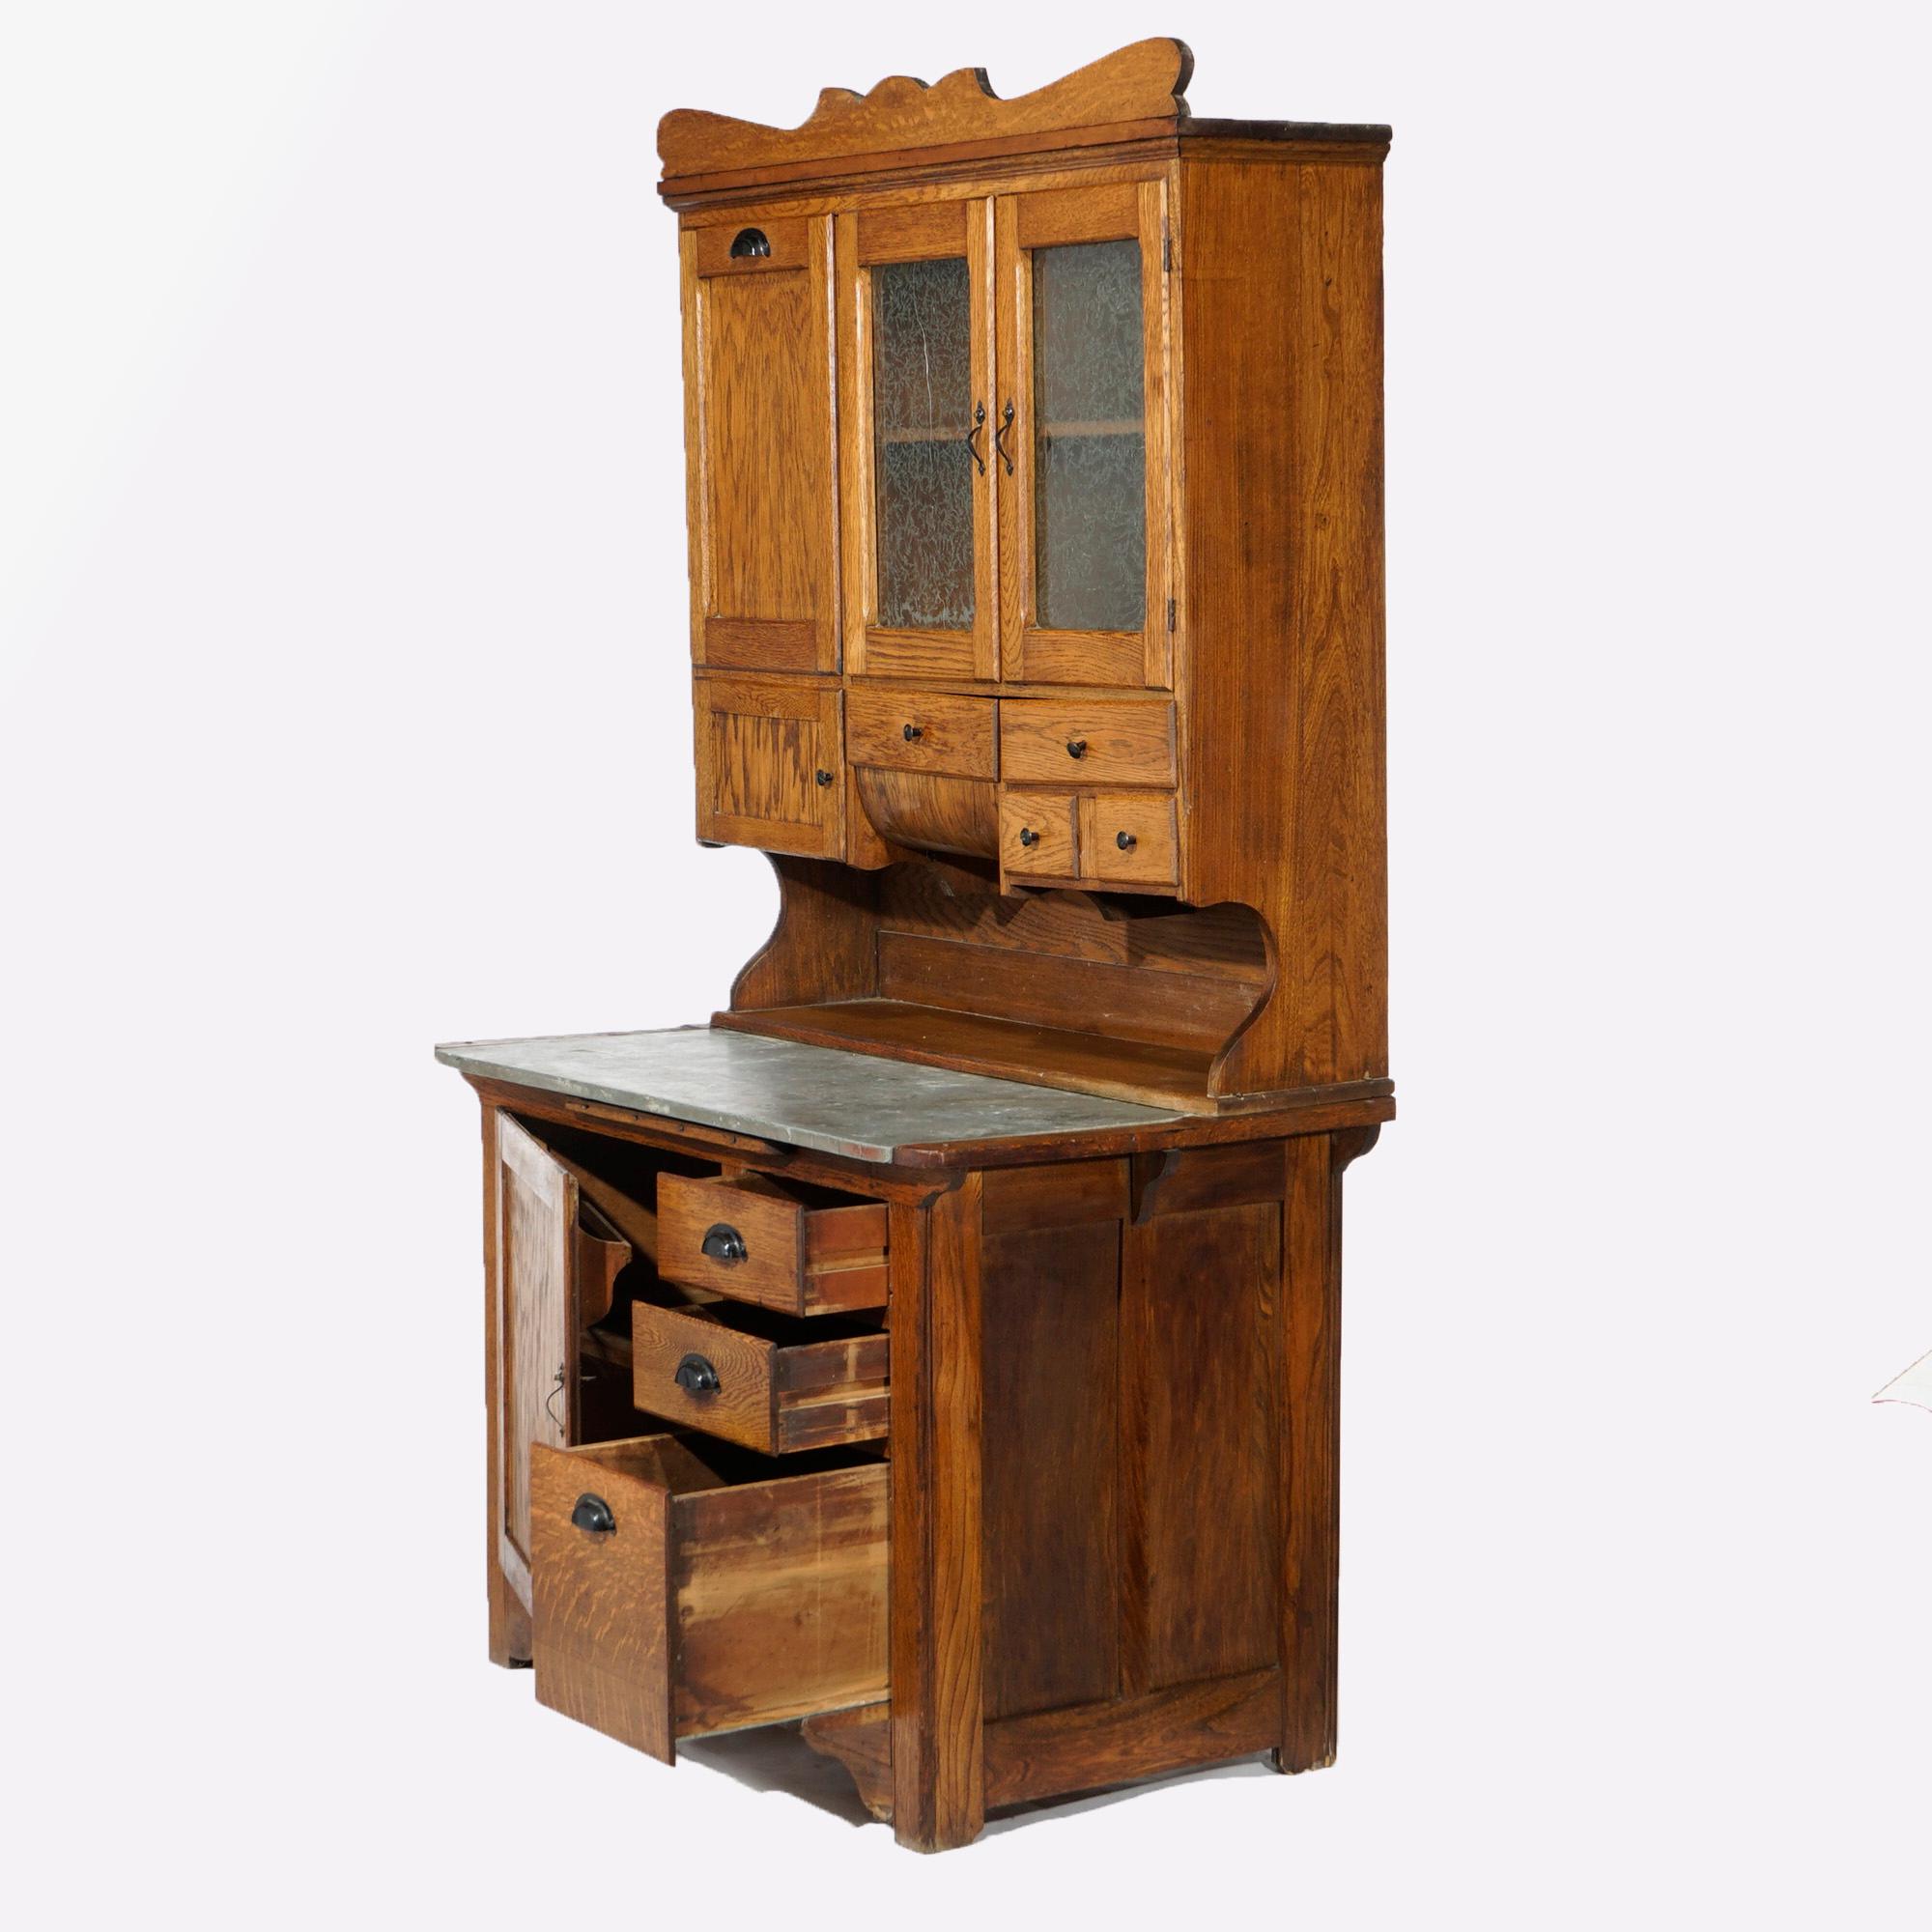 An antique Hoosier kitchen cabinet offers oak construction with shaped crest over upper with pull out flor bin and cabinets over work space having lower cabinets, c1900

Measures- 75.75''H x 42.5''W x 26.5''D